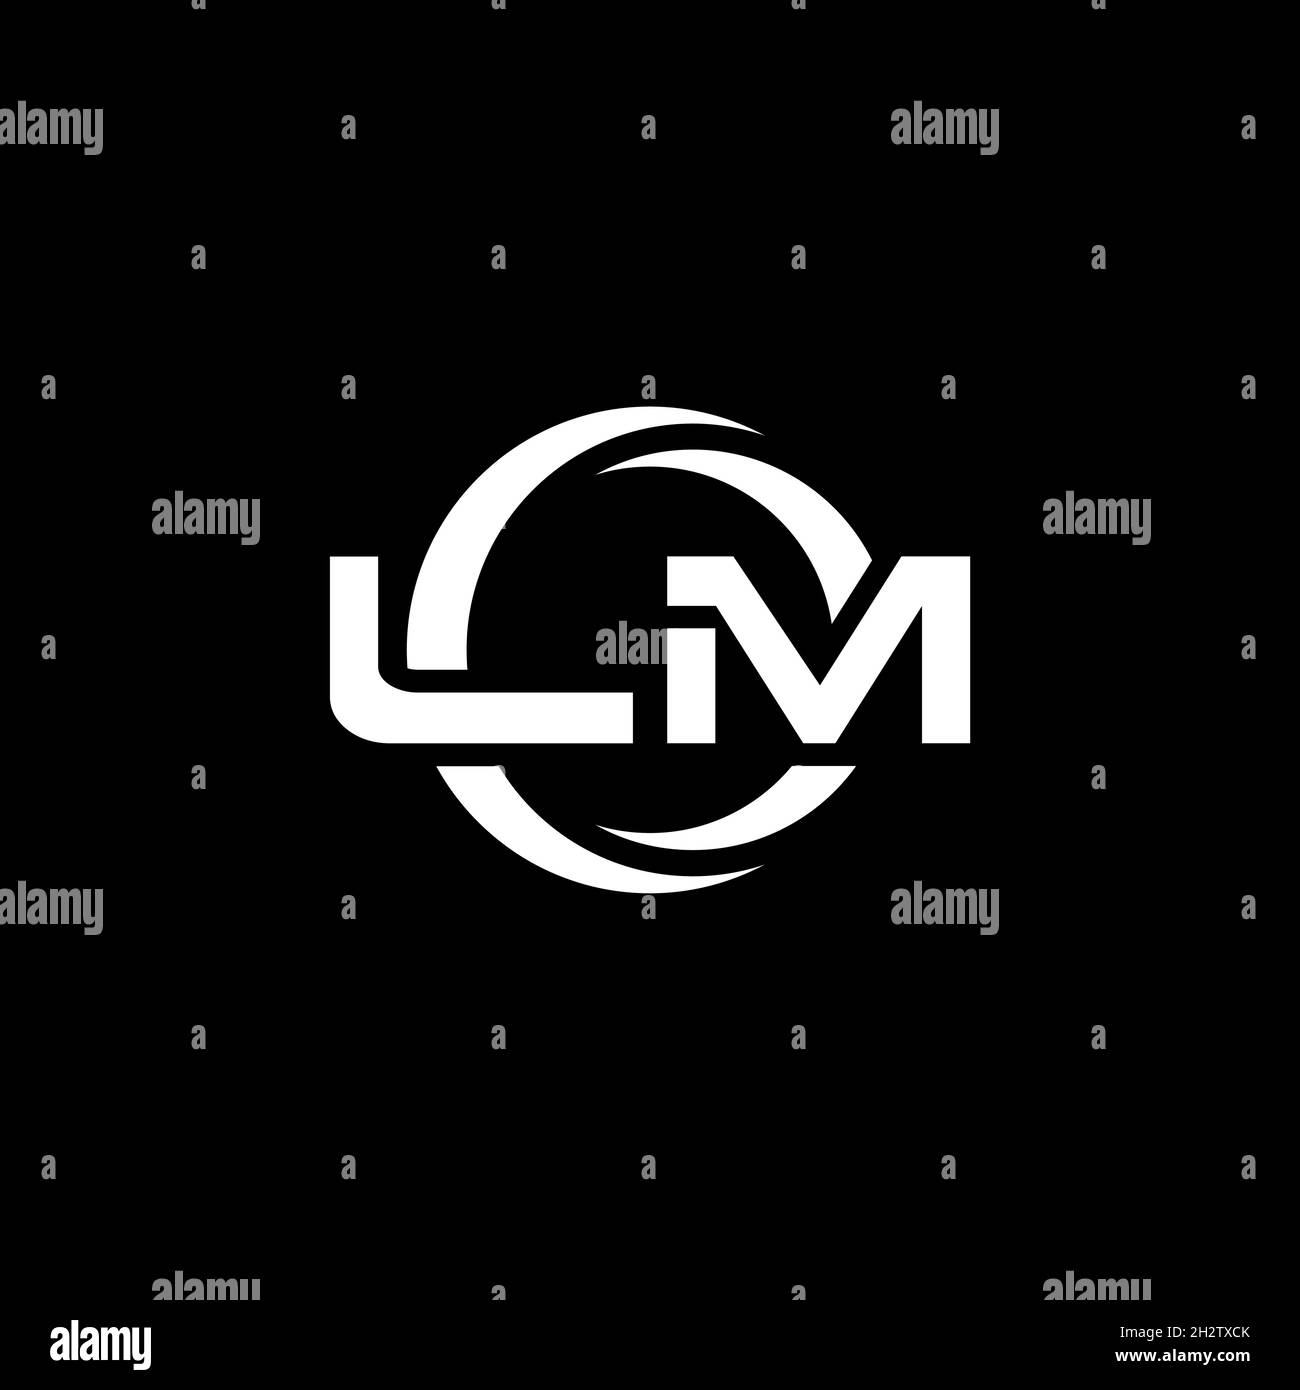 LM Monogram logo letter with simple shape and circle rounded design template isolated on black background Stock Vector